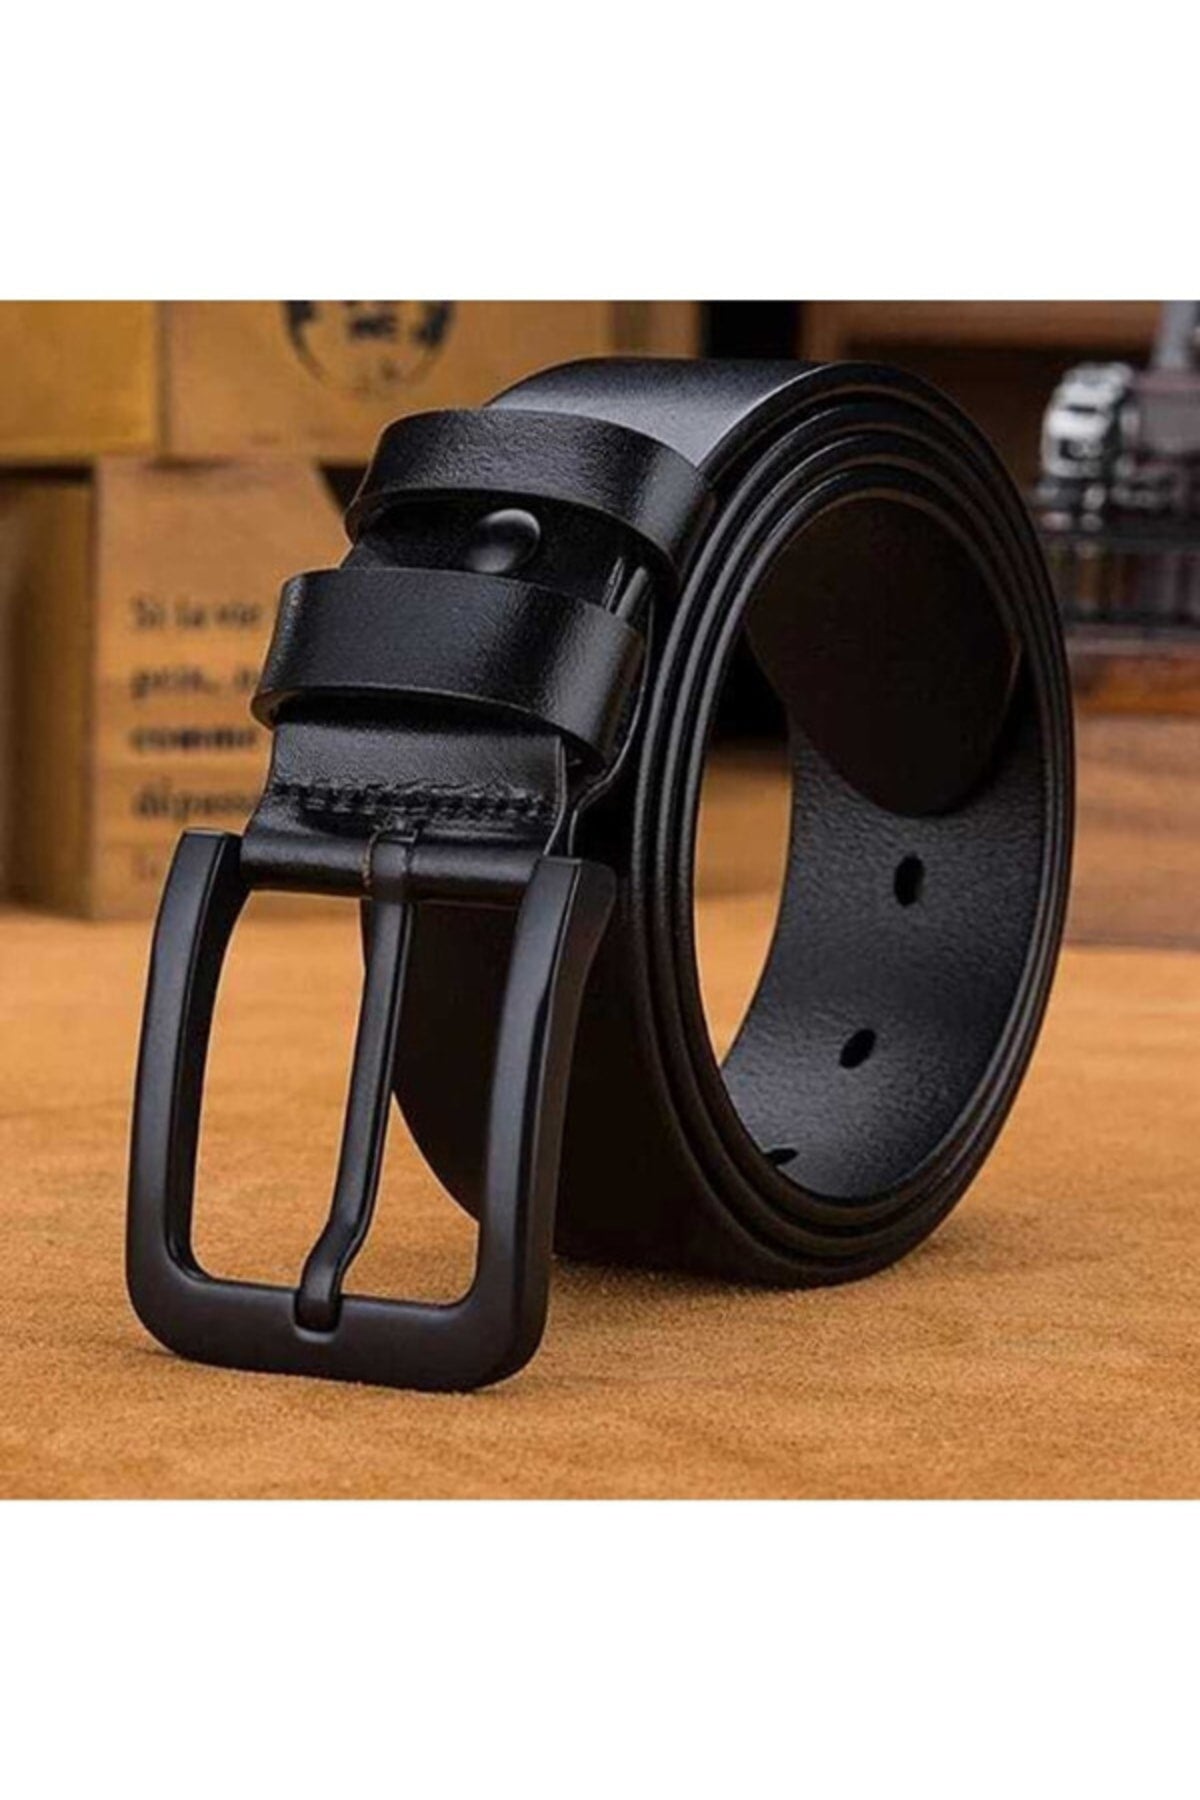 Belt Suitable For Men's Leather Jeans And Canvas Trousers